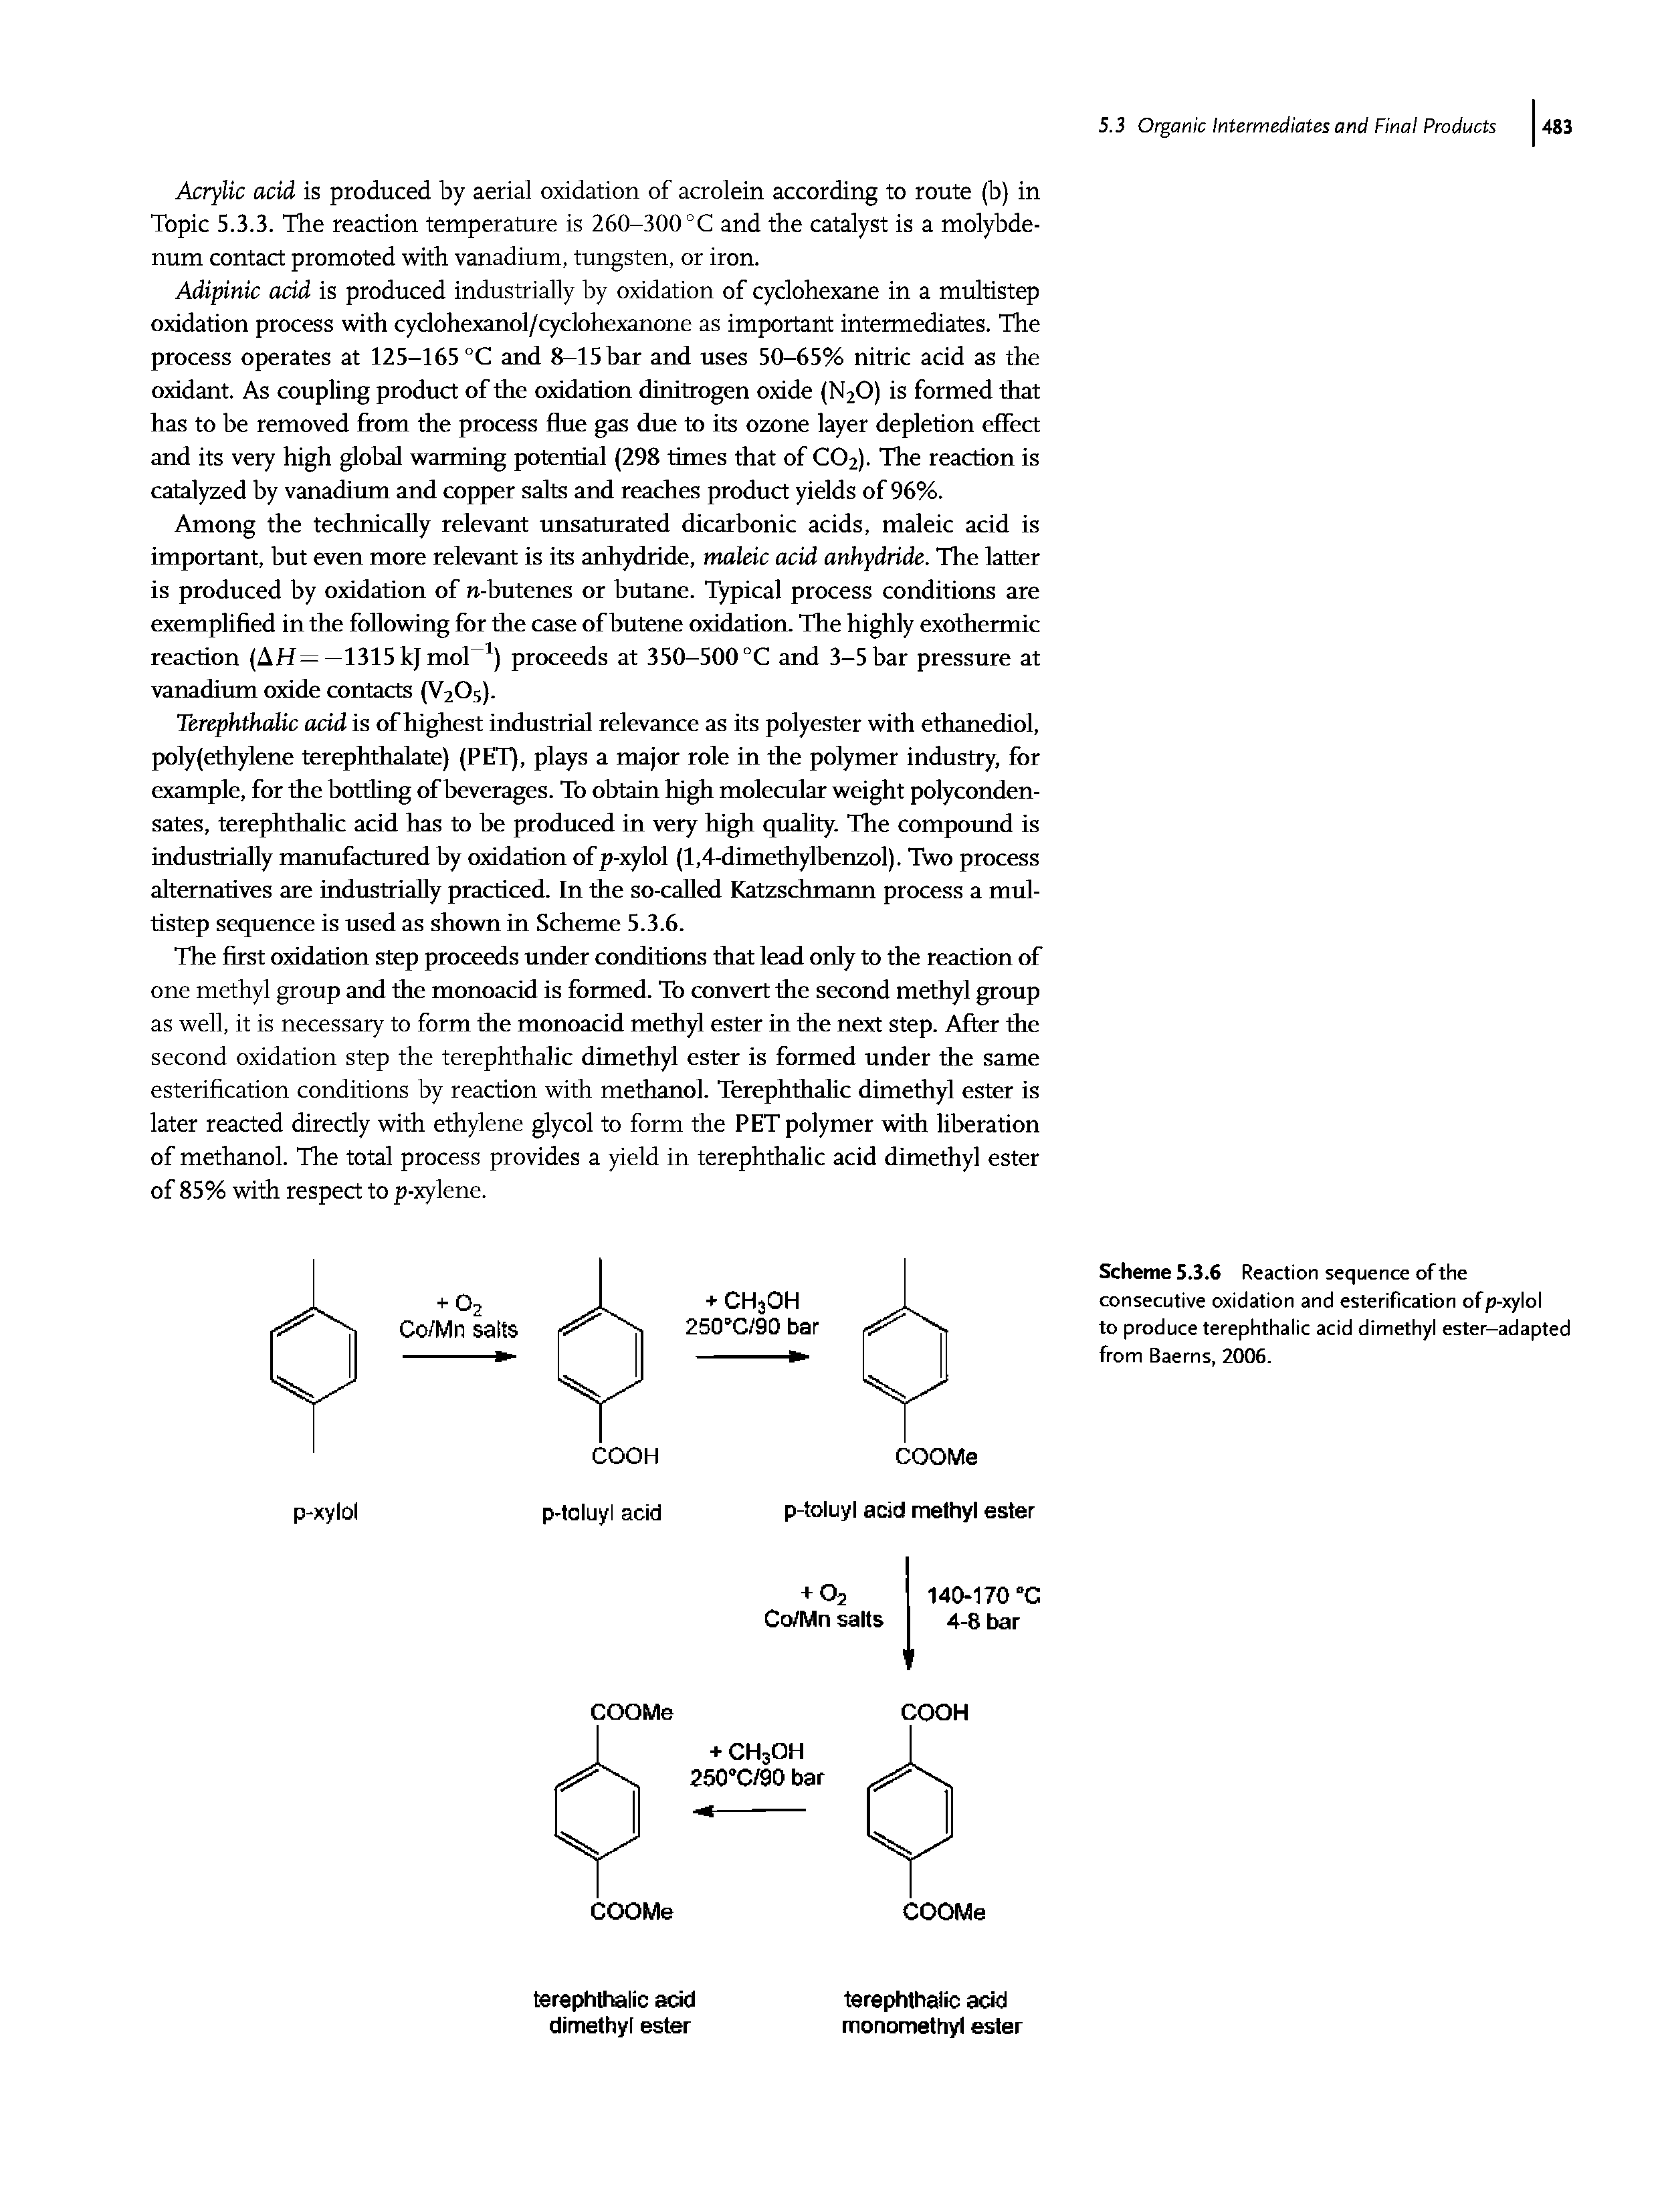 Scheme 5.3.6 Reaction sequence of the consecutive oxidation and esterification ofp-xylol to produce terephthalic acid dimethyl ester-adapted from Baerns, 2006.